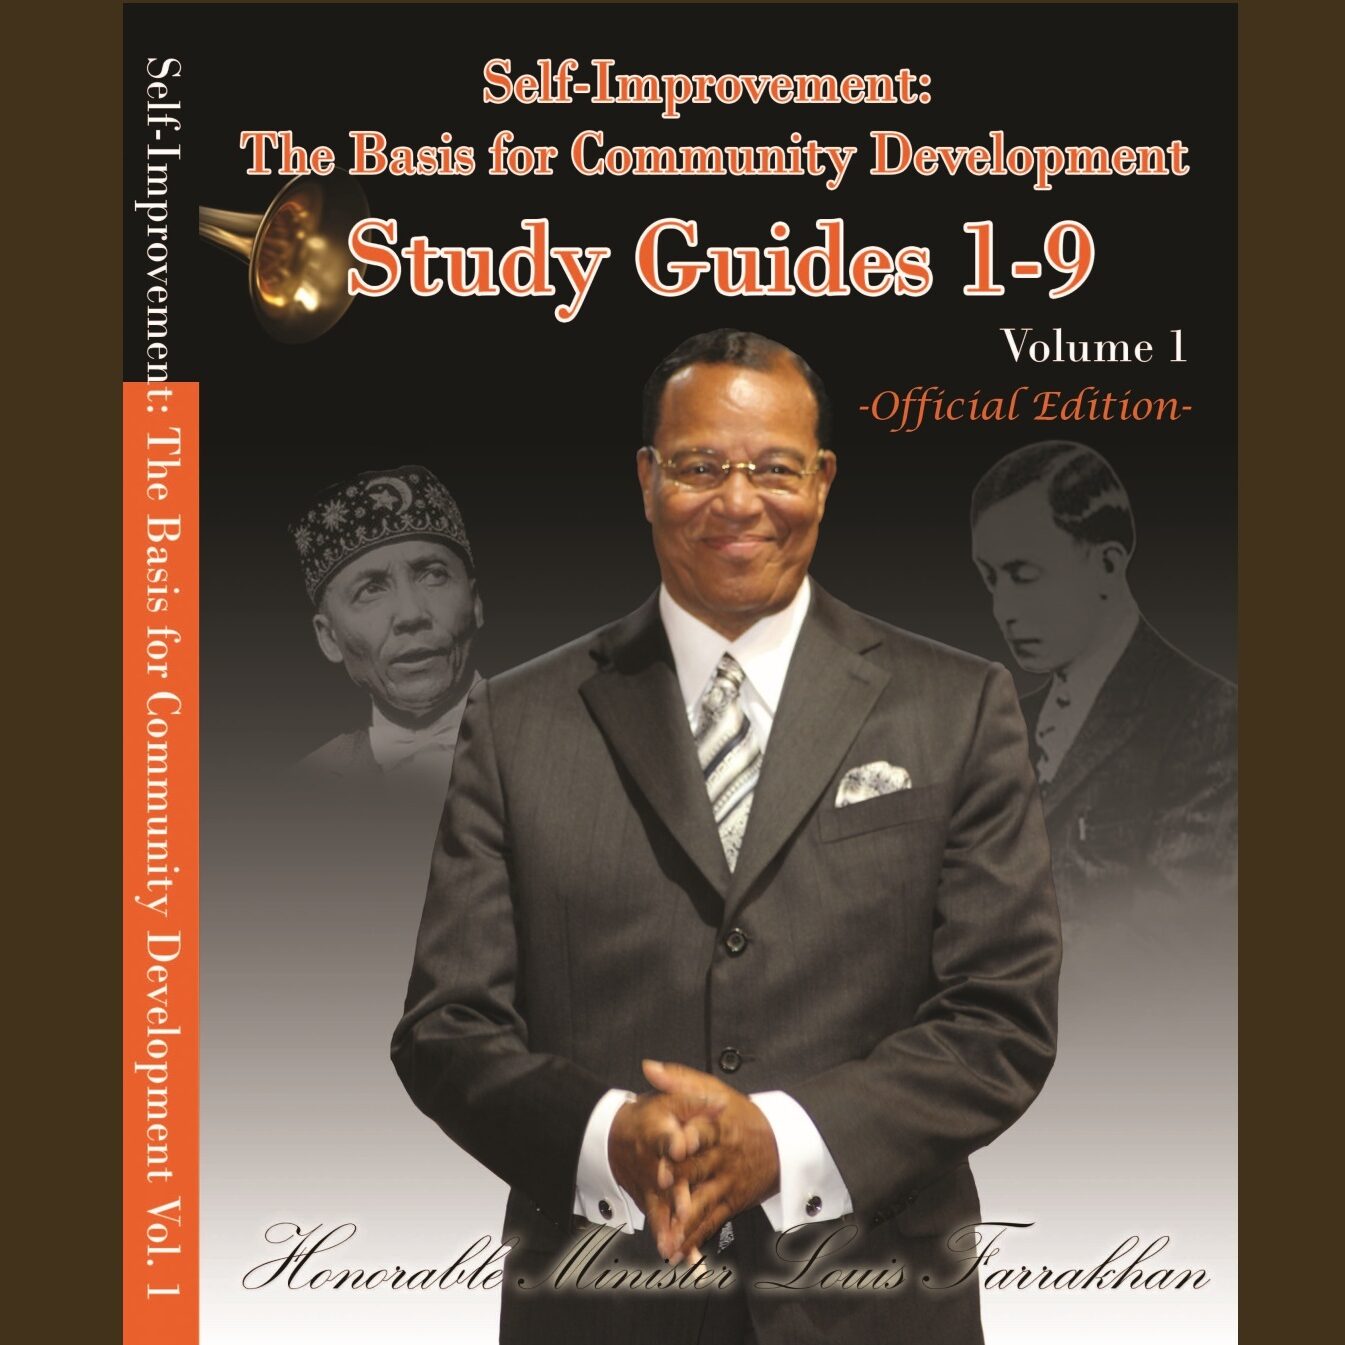 Image of the cover of Study Guides one through nine